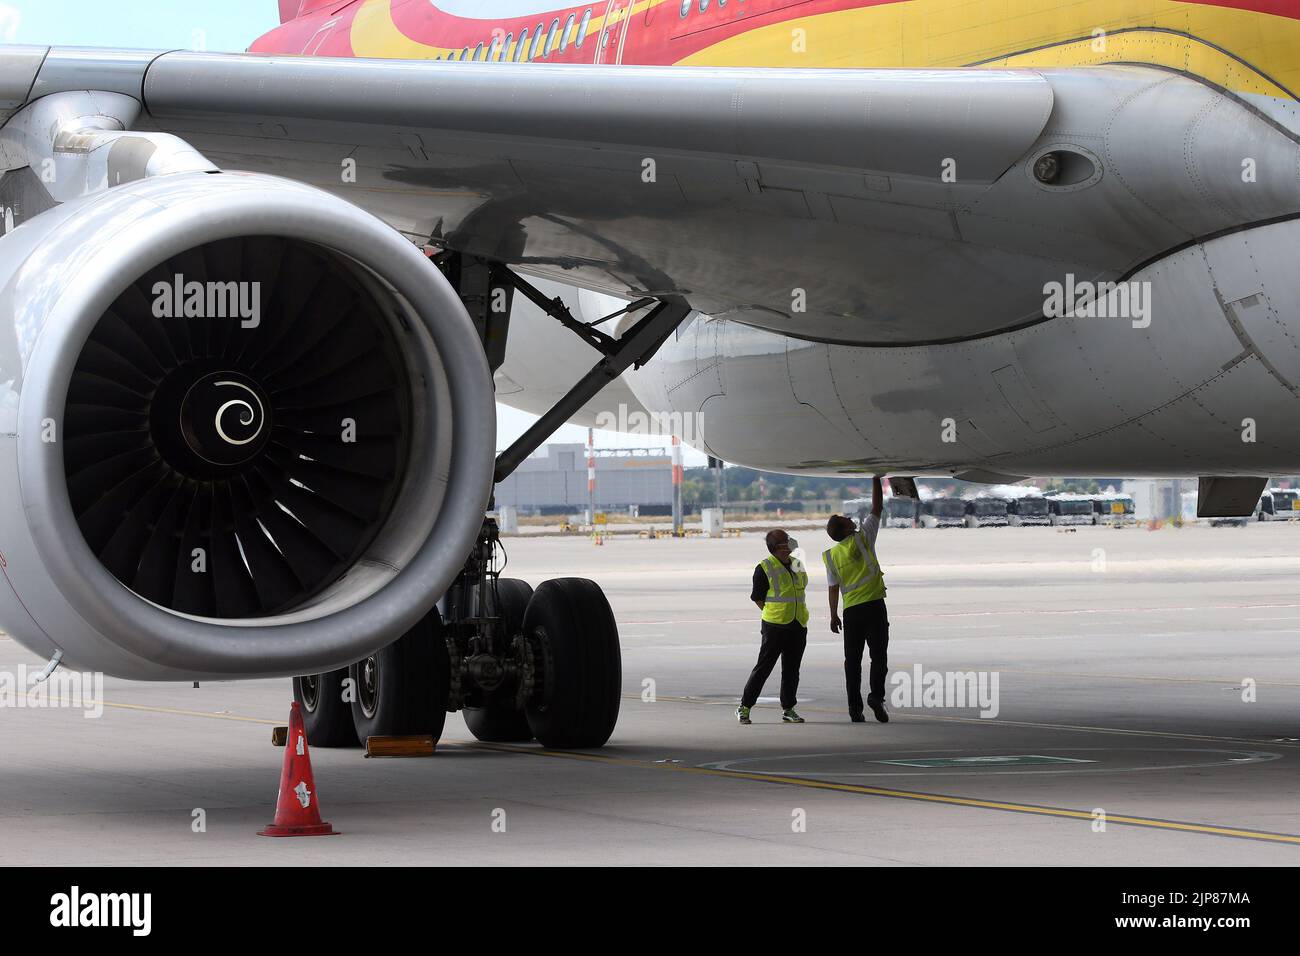 12 August 2022, Brandenburg, Schönefeld: Members of the crew inspect an Airbus A330-300 aircraft of the airline before the first flight of the Chinese airline Hainan from BER, at Berlin Brandenburg Airport. Photo: Wolfgang Kumm/dpa Stock Photo